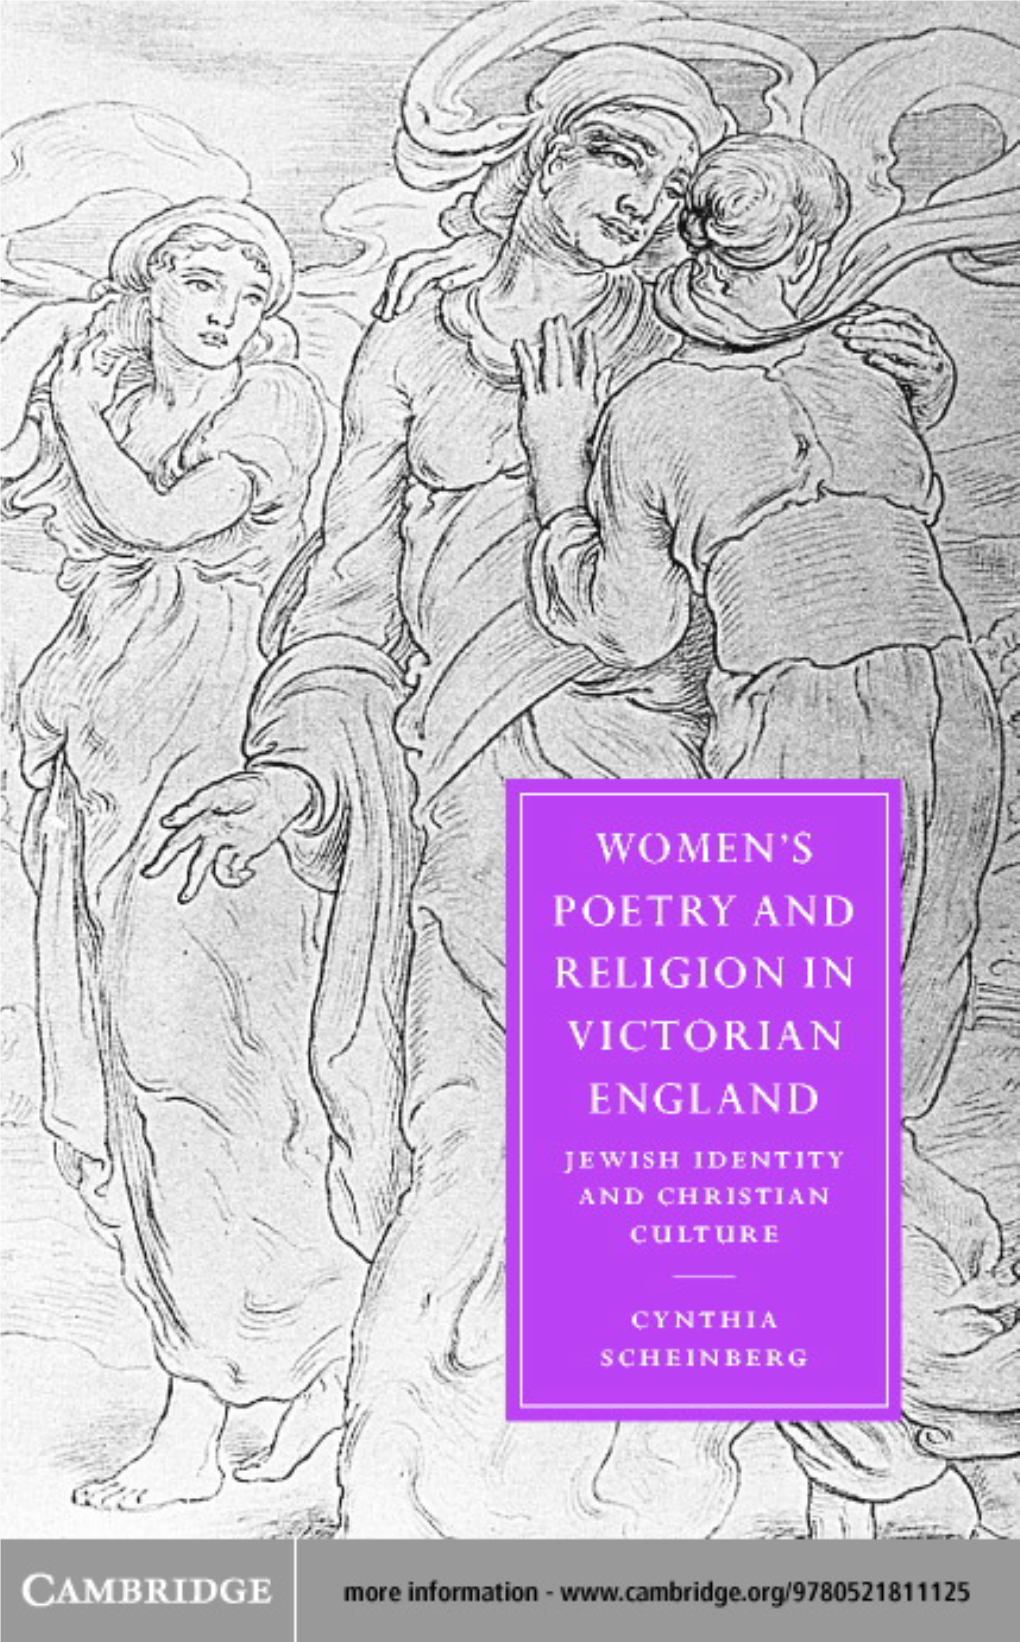 WOMEN's POETRY and RELIGION in VICTORIAN ENGLAND: Jewish